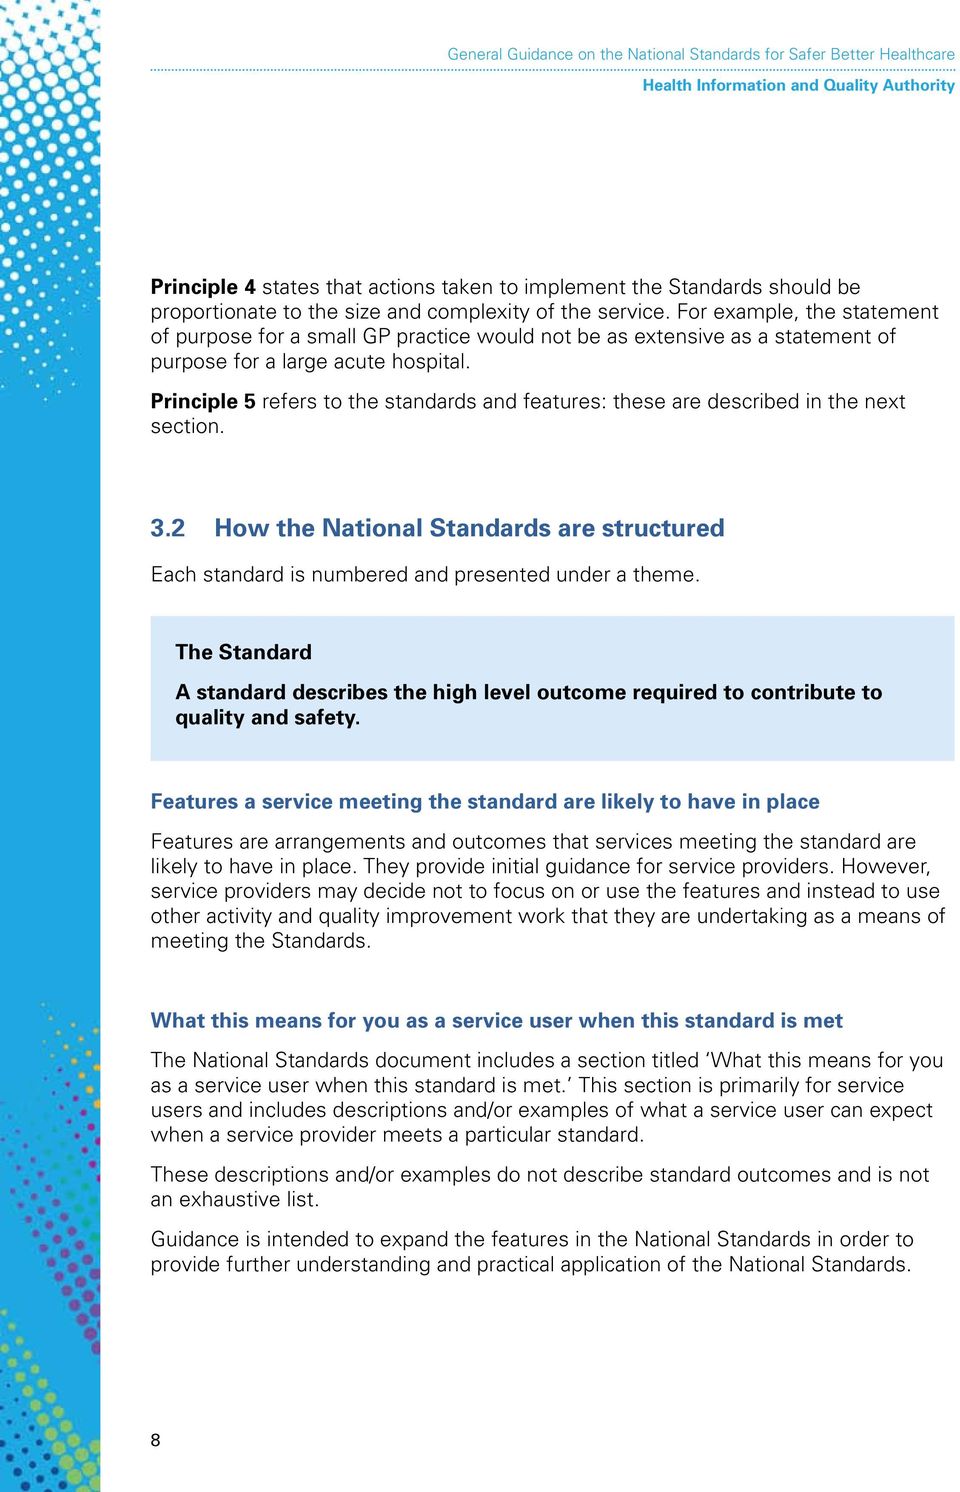 Principle 5 refers to the standards and features: these are described in the next section. 3.2 How the National Standards are structured Each standard is numbered and presented under a theme.